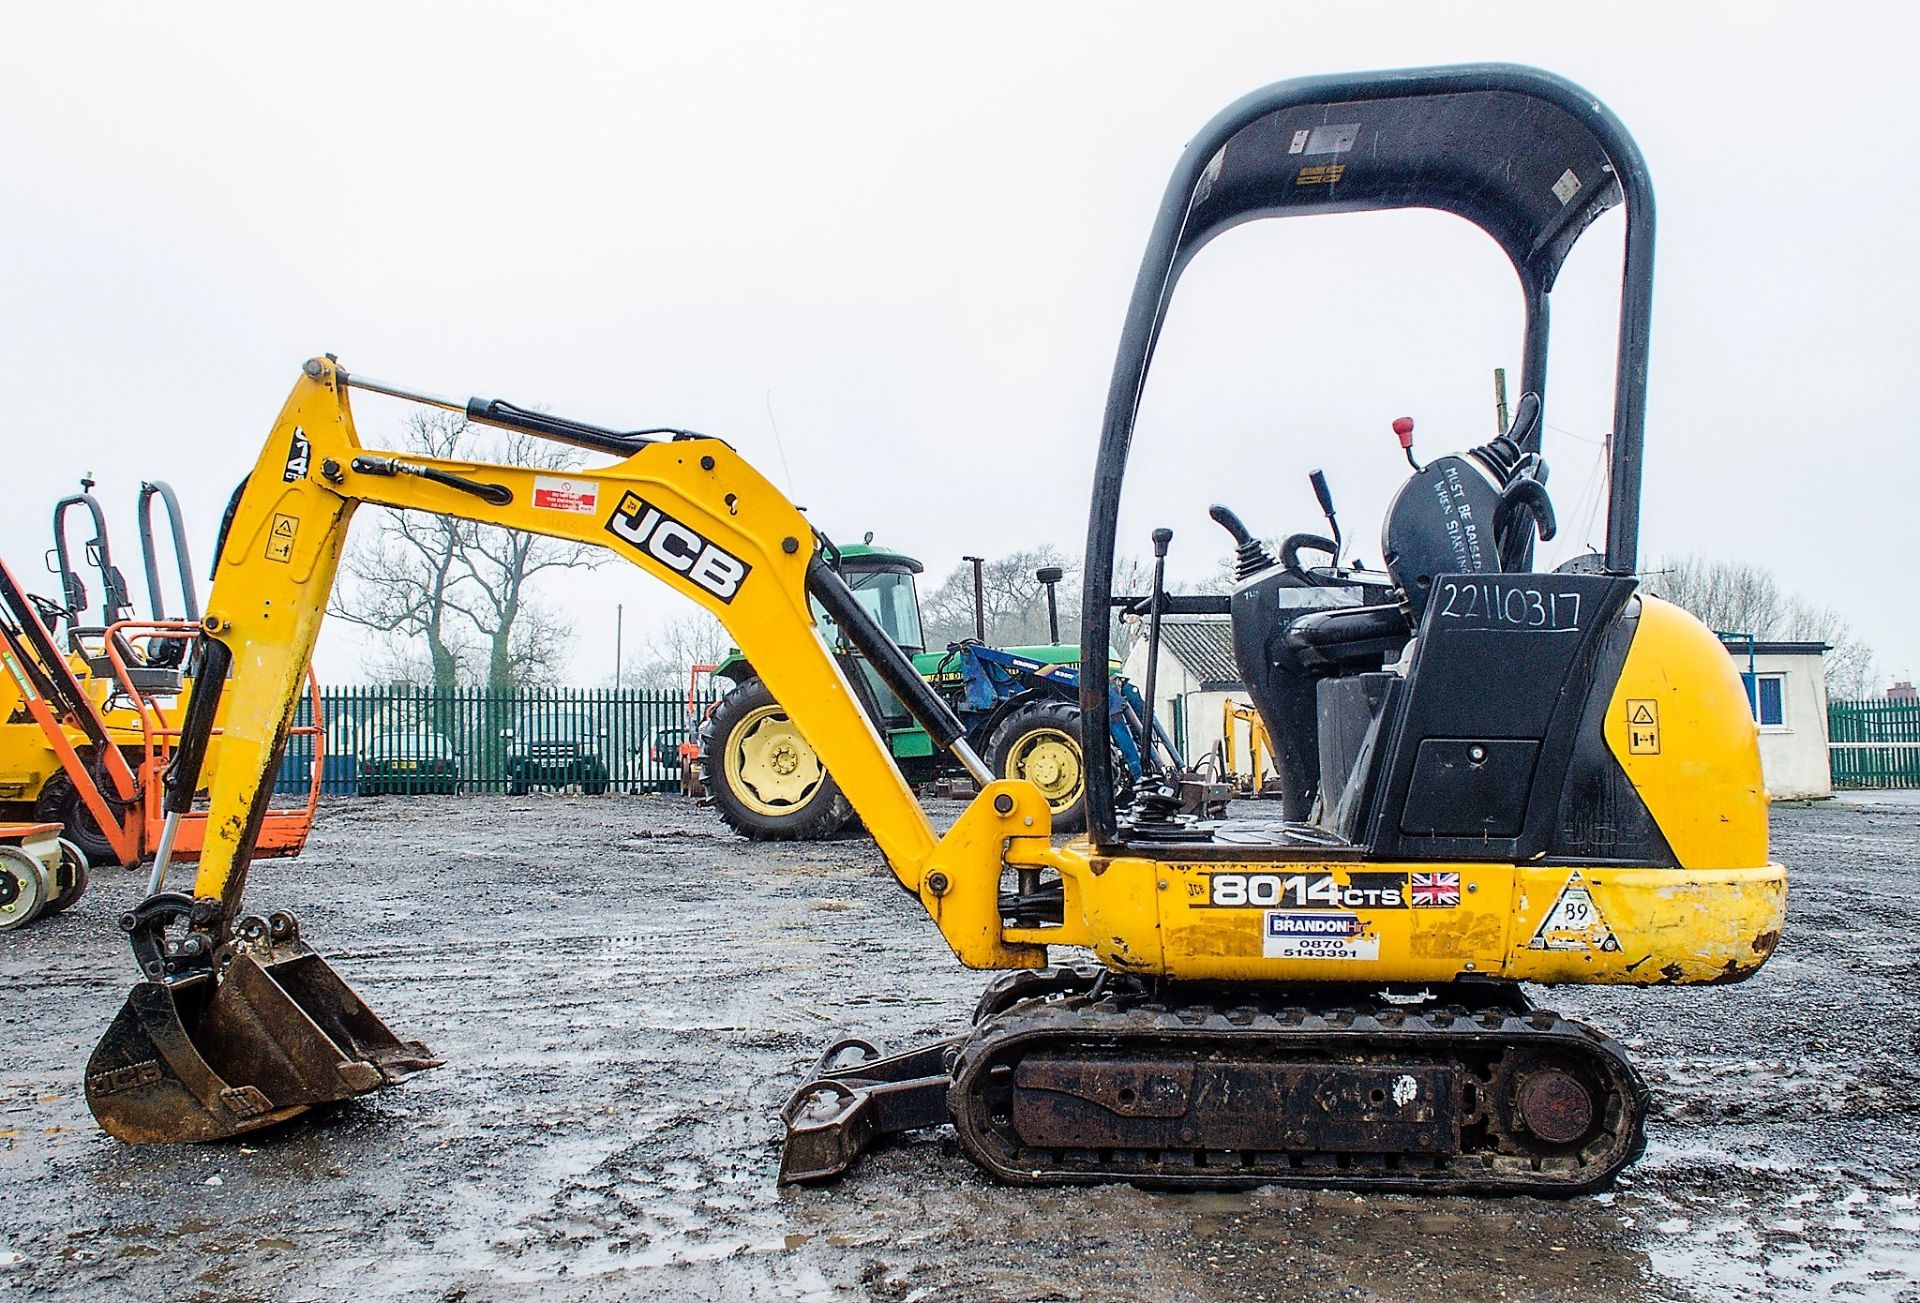 JCB 801.4 CTS1.5 tonne rubber tracked mini excavator Year: 2014 S/N: 2070484 Recorded Hours: 1398 - Image 7 of 18